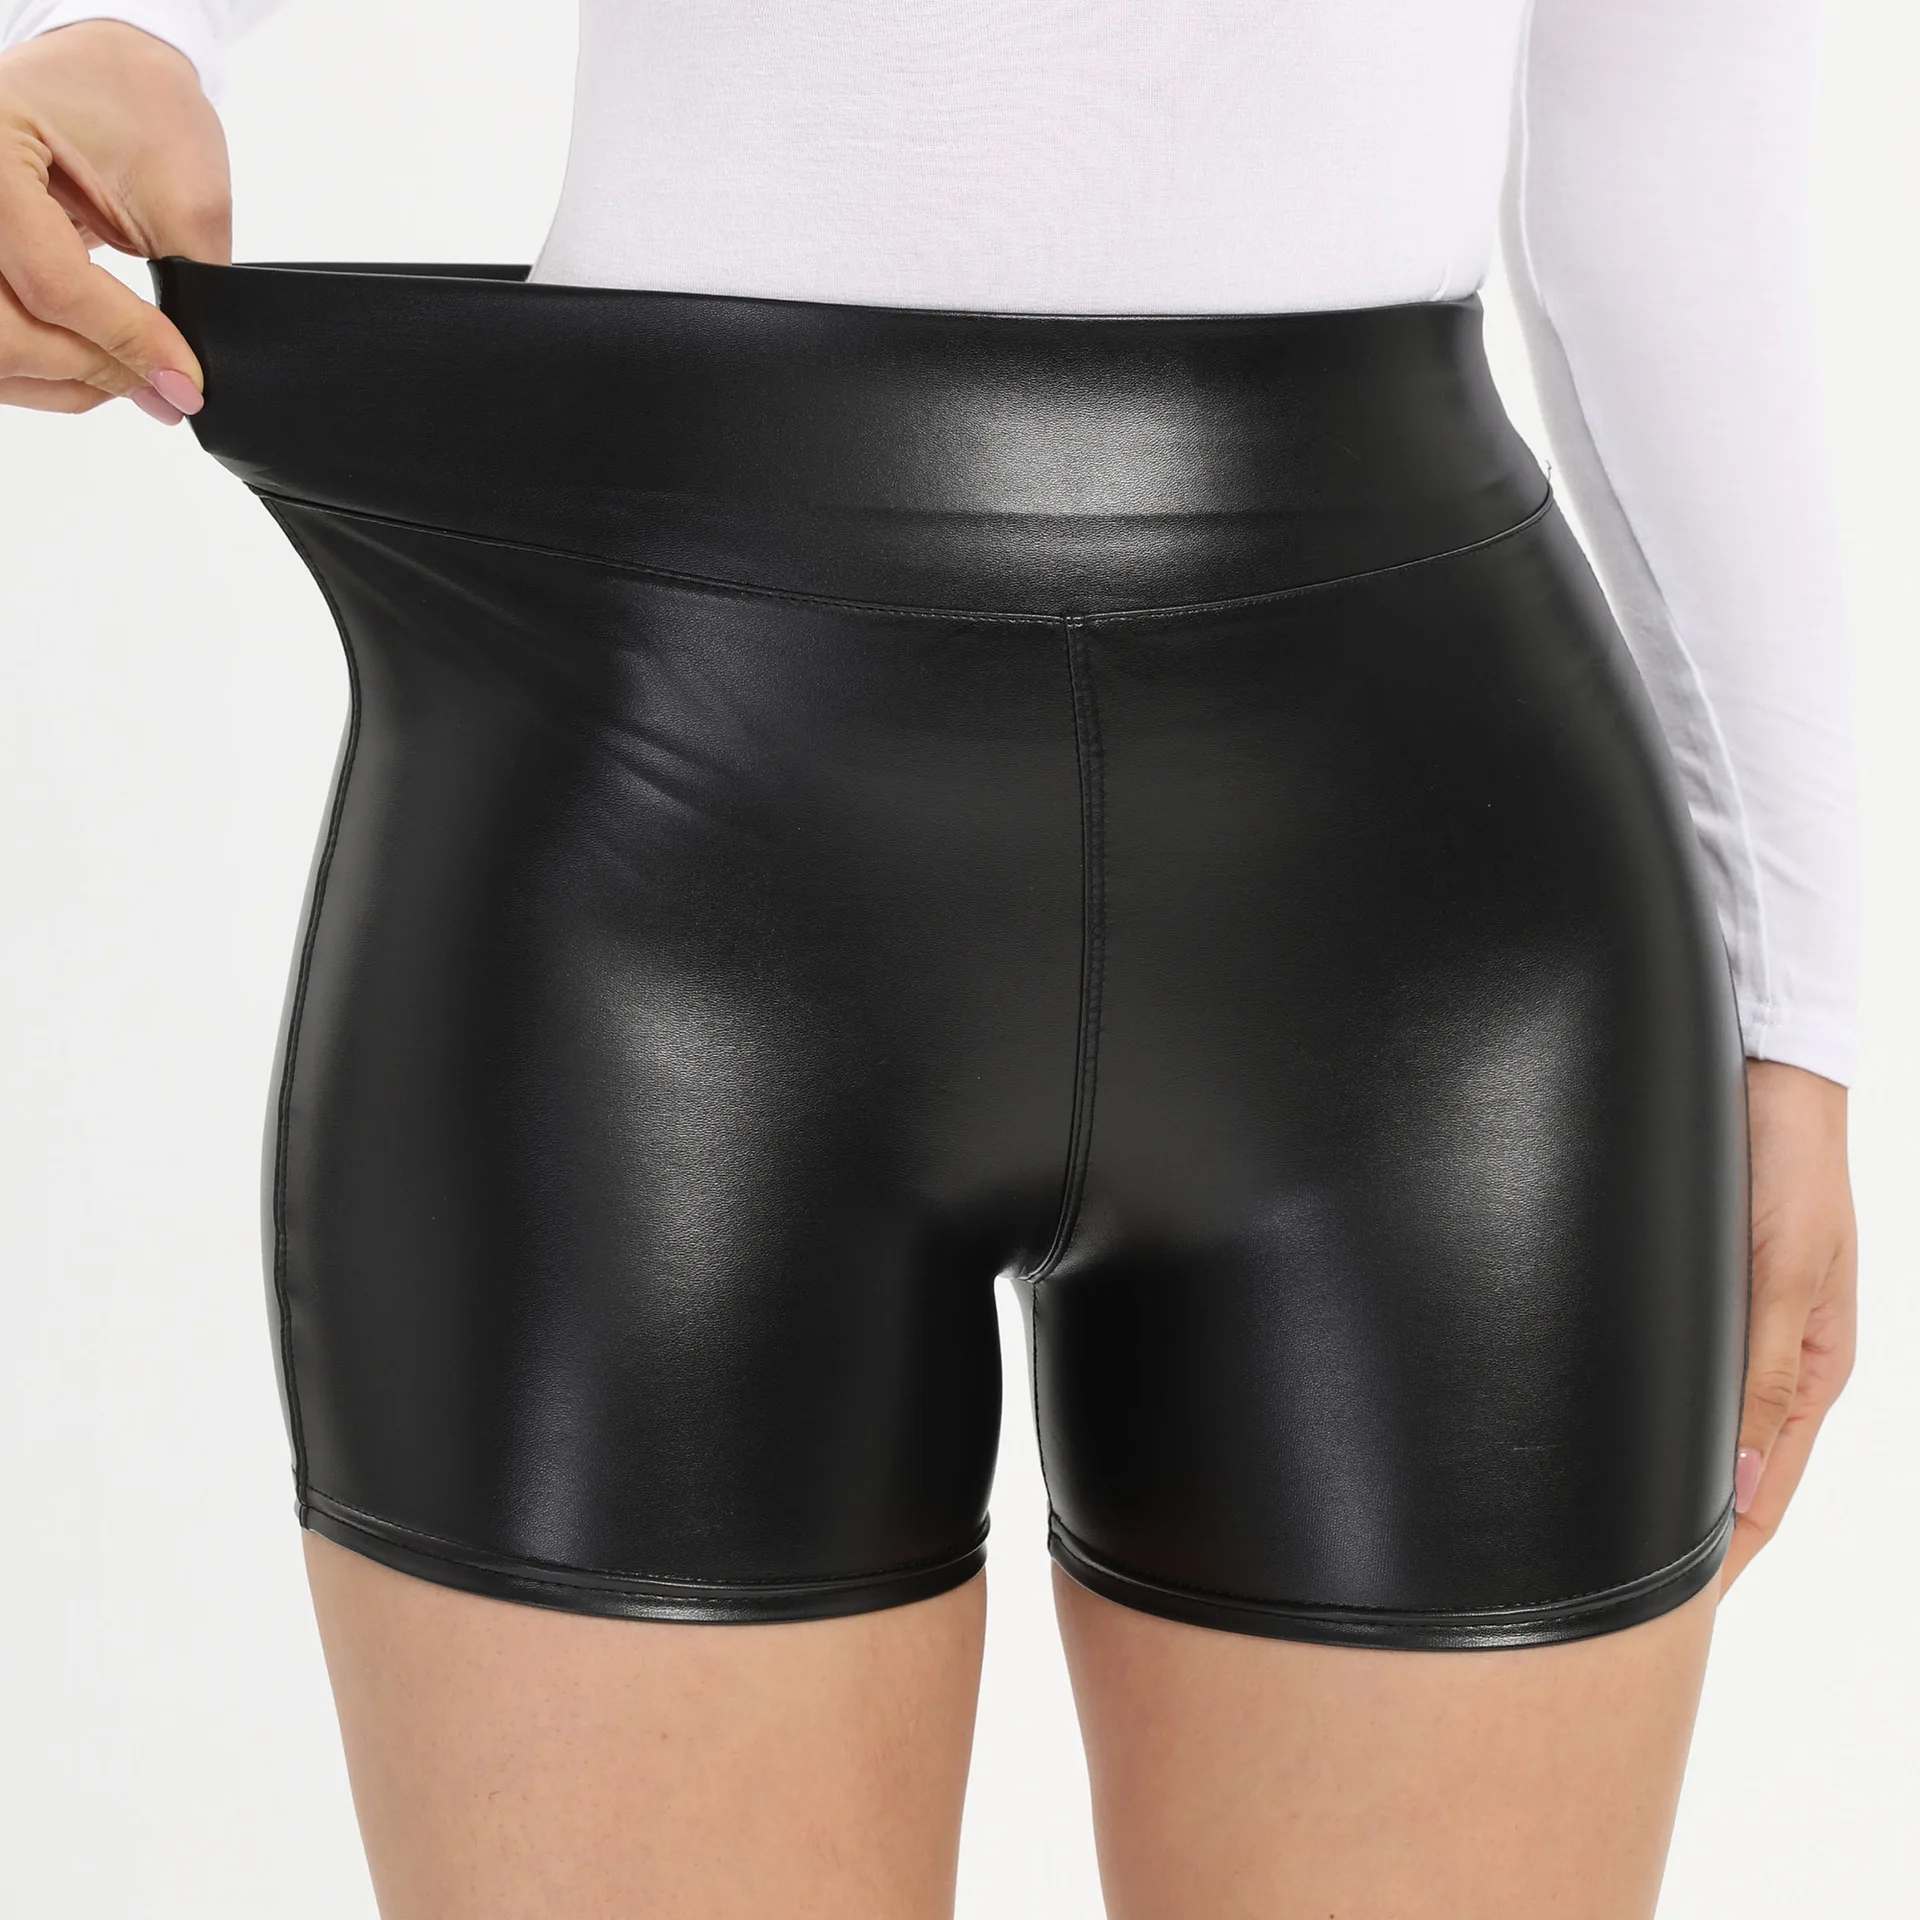 lululemon shorts New  Summer Straight Solid Color Fashion Leather Shorts Female Pu  Sexy Hot Nightclub Casual Sports Pants Pole Dance trendy clothes